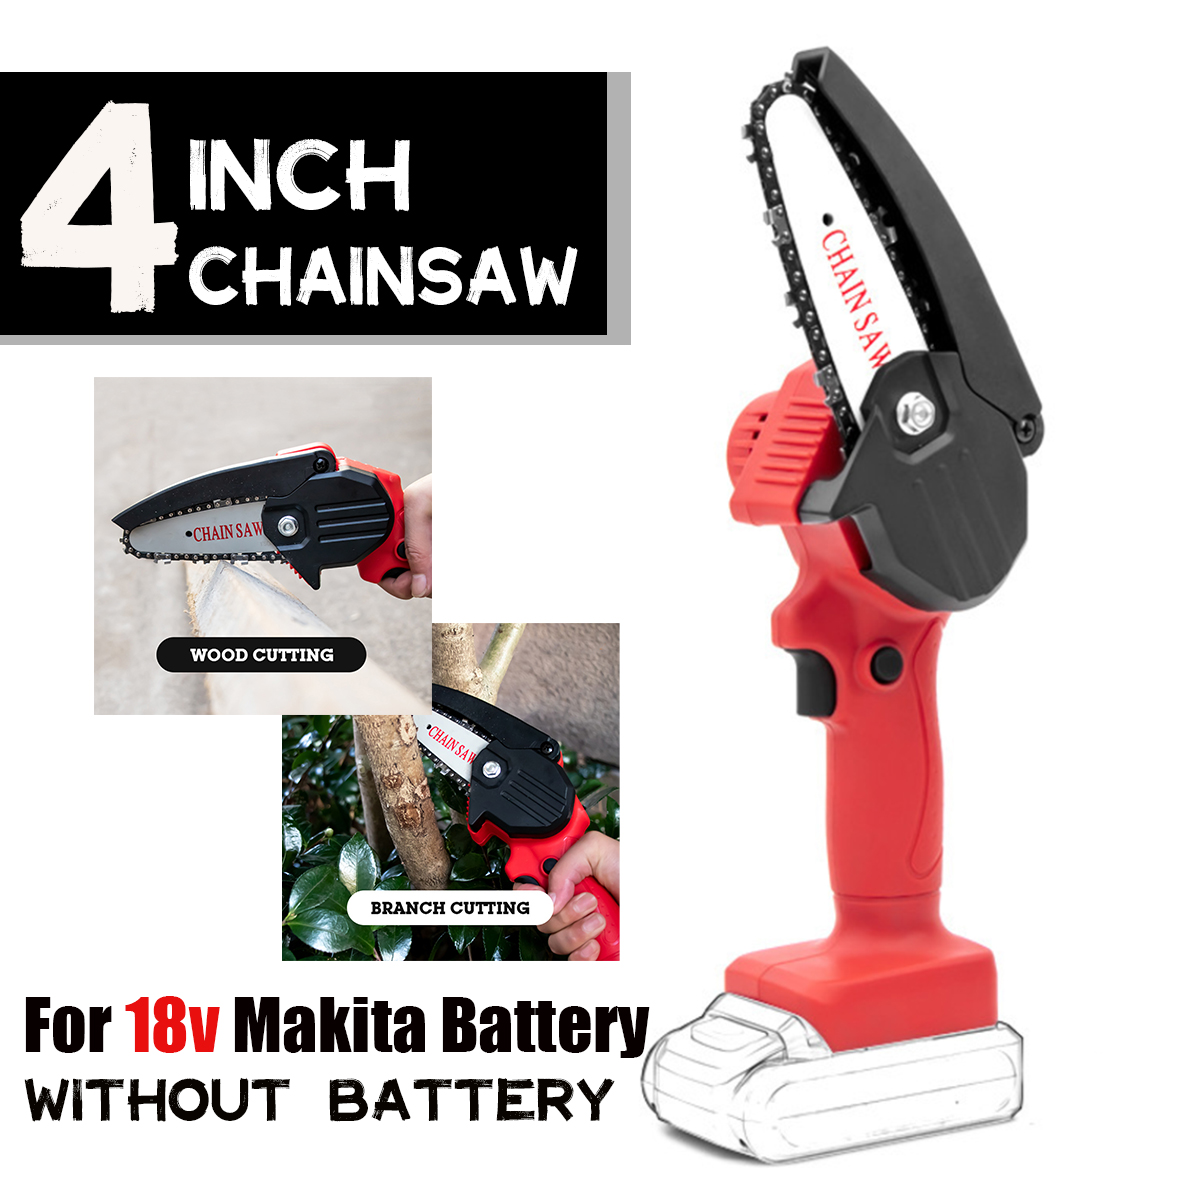 Portable-Electric-Saw-Woodworking-Chain-Saw-Tree-Pruning-Tool-for-18V-MakitaIzumi-Battery-1764621-2